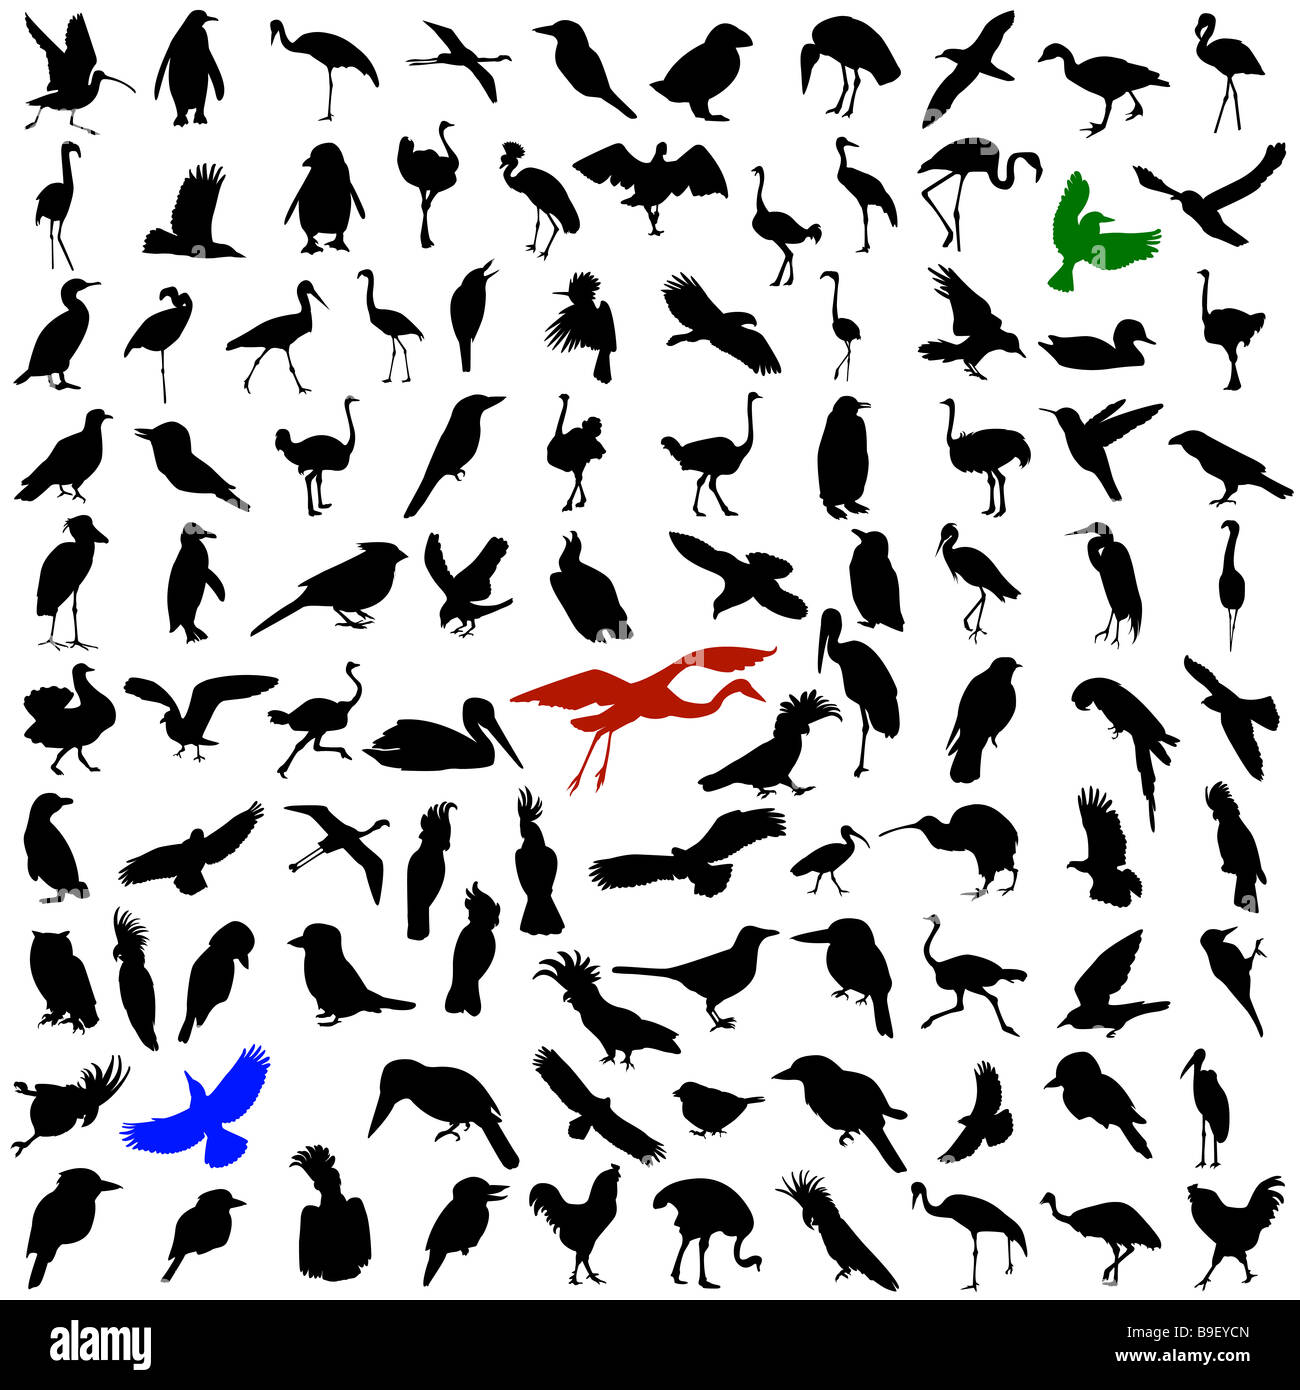 Hundred silhouettes of birds Stock Photo